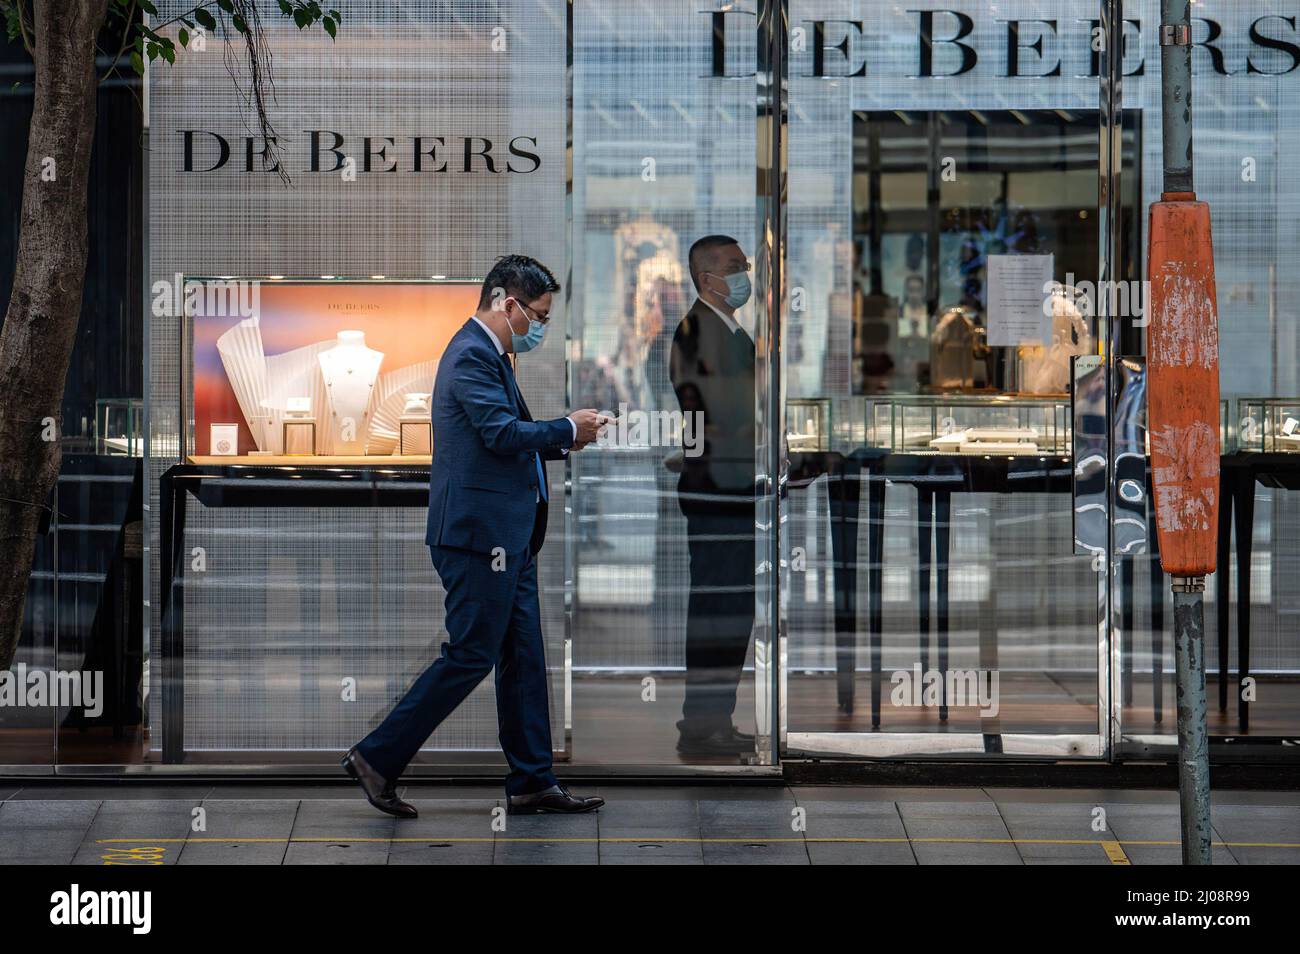 A man in a surgical mask walks by a DeBeers store in the Central Business District of Hong Kong. According to the Hong Kong Government's economic analysis, the retail sector is facing immense pressure in the near-term, with the pandemic and associated social distancing measures creating challenges for a revival. Stock Photo